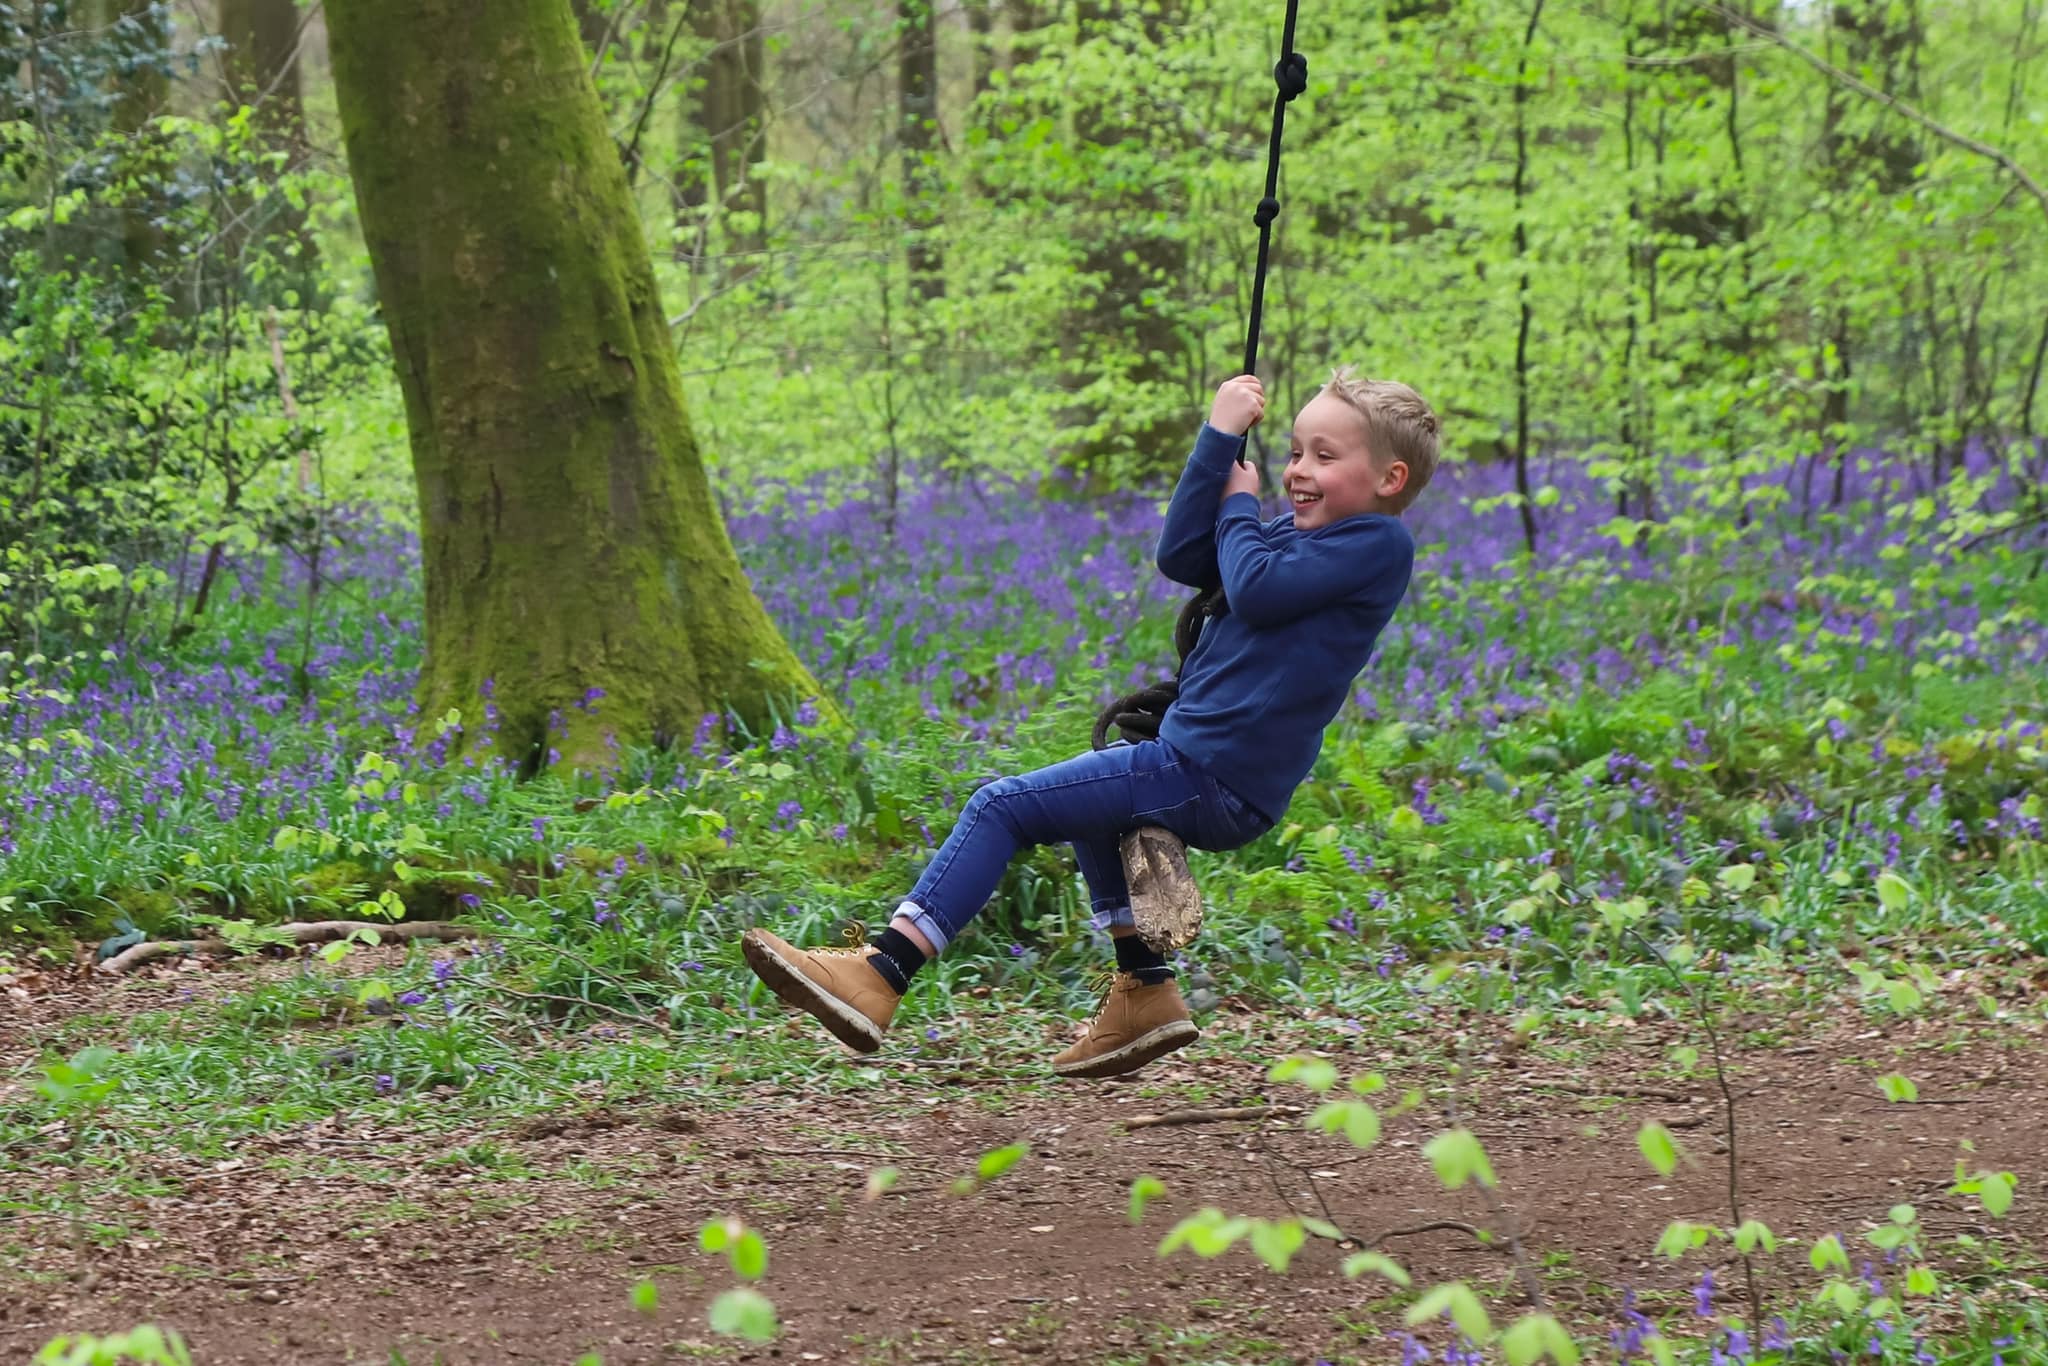 Young boy on a swing among bluebells